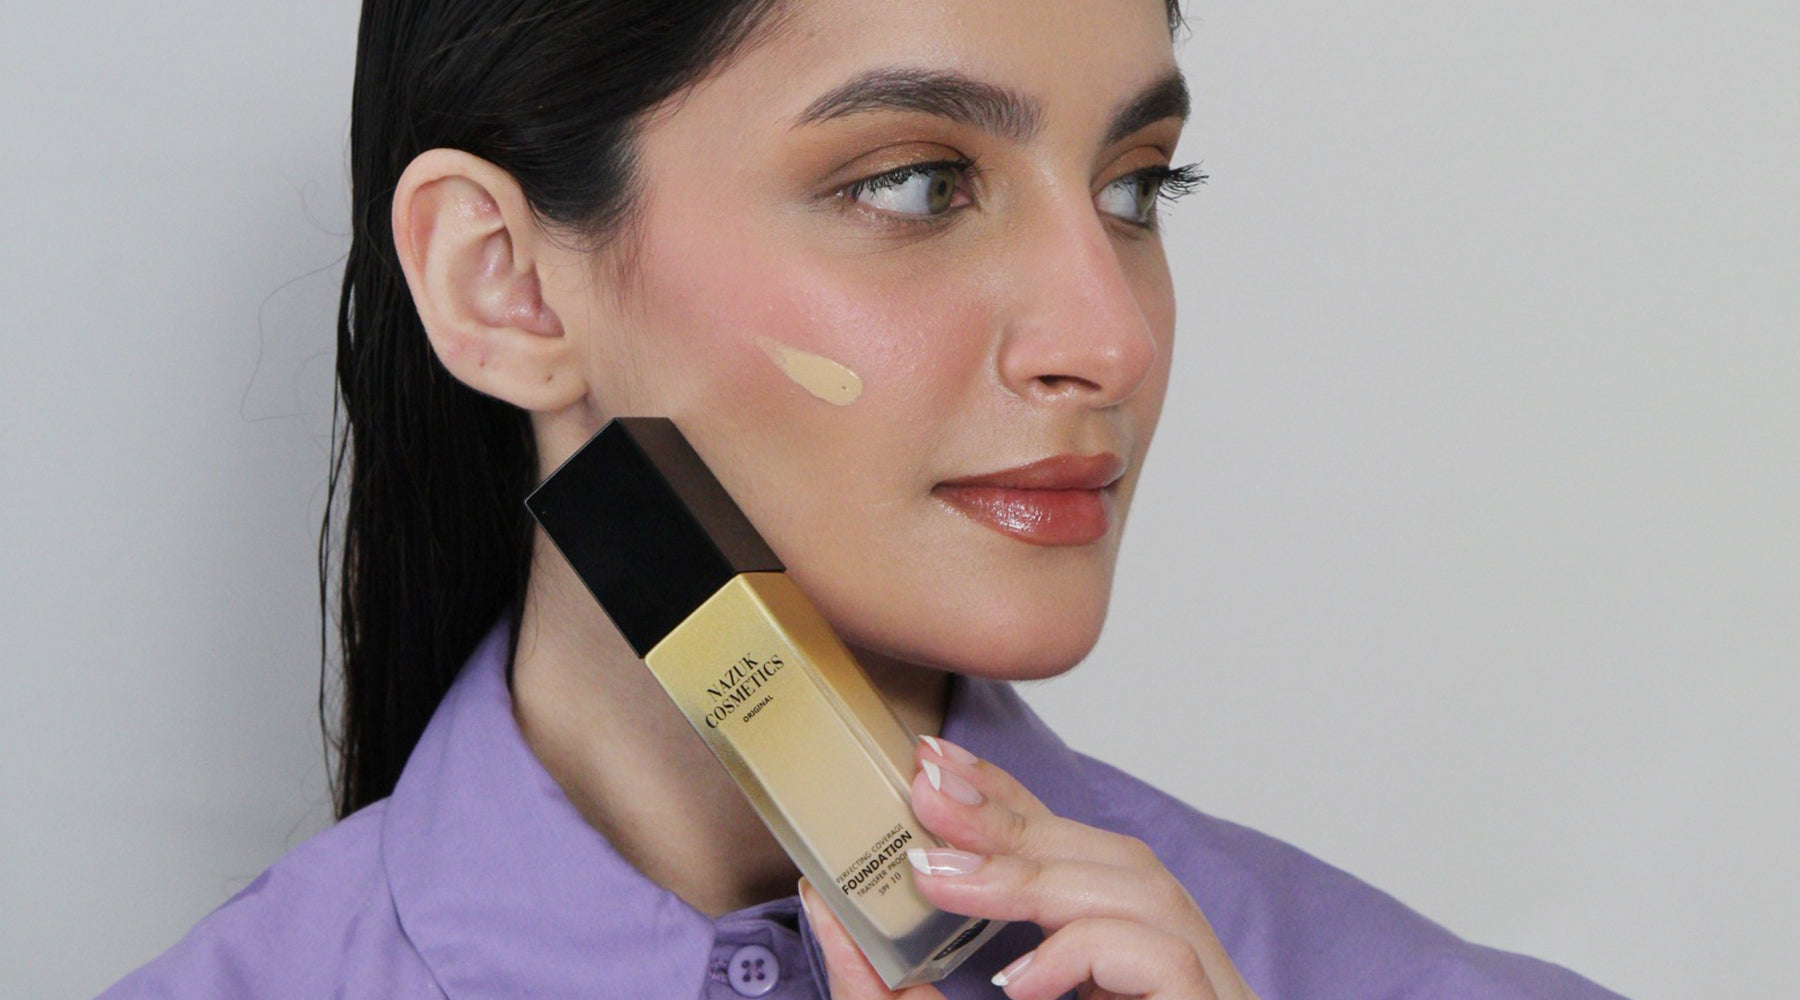 Achieving a Flawless Foundation Application: 5 Pro Tips